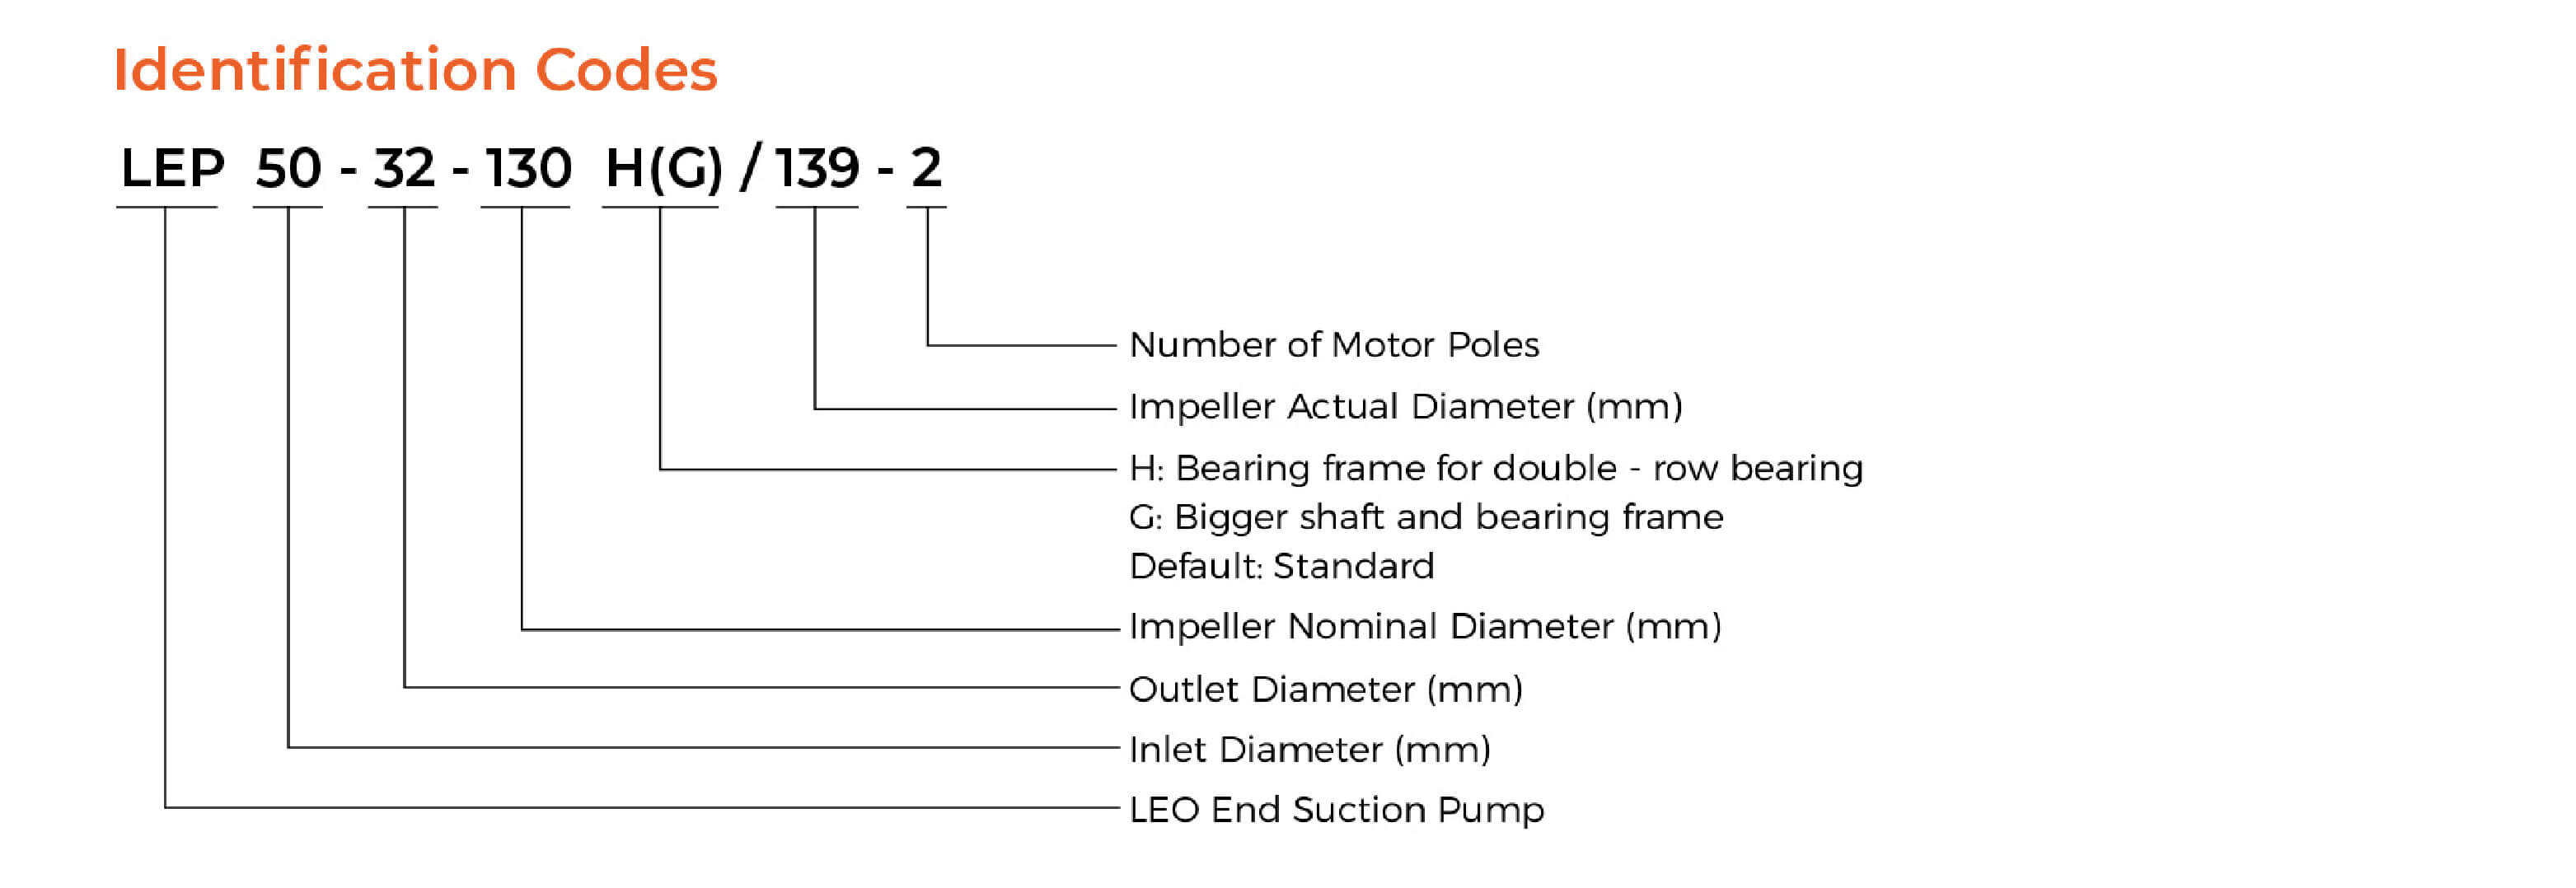 LEP End Suction Centrifugal Pump Identification Codes